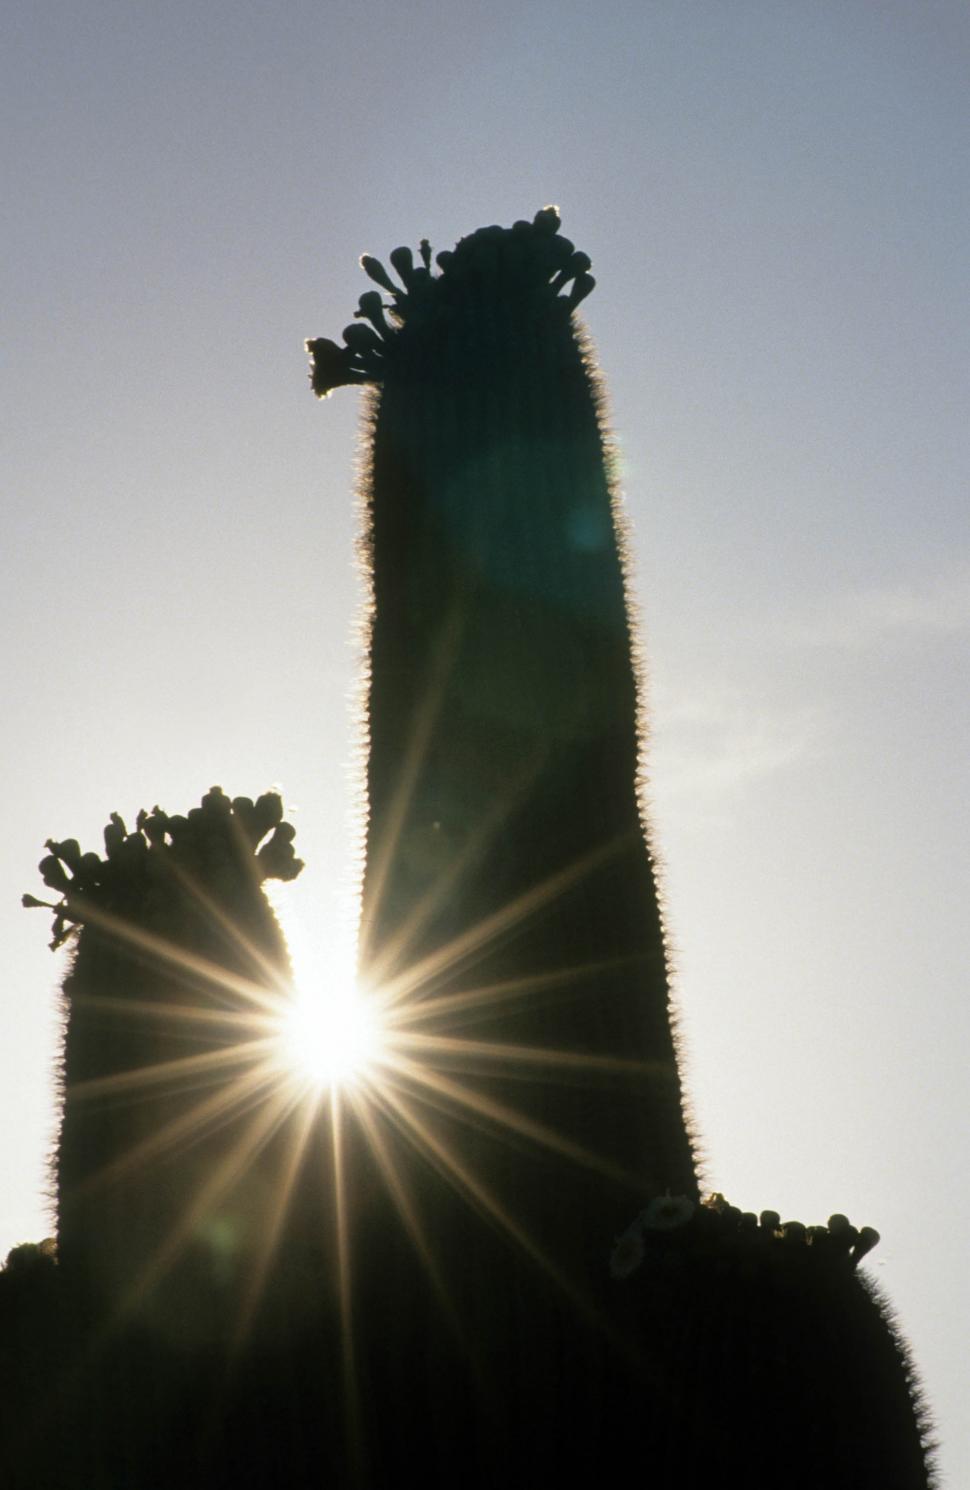 26+ Thousand Cactus Silhouette Royalty-Free Images, Stock Photos